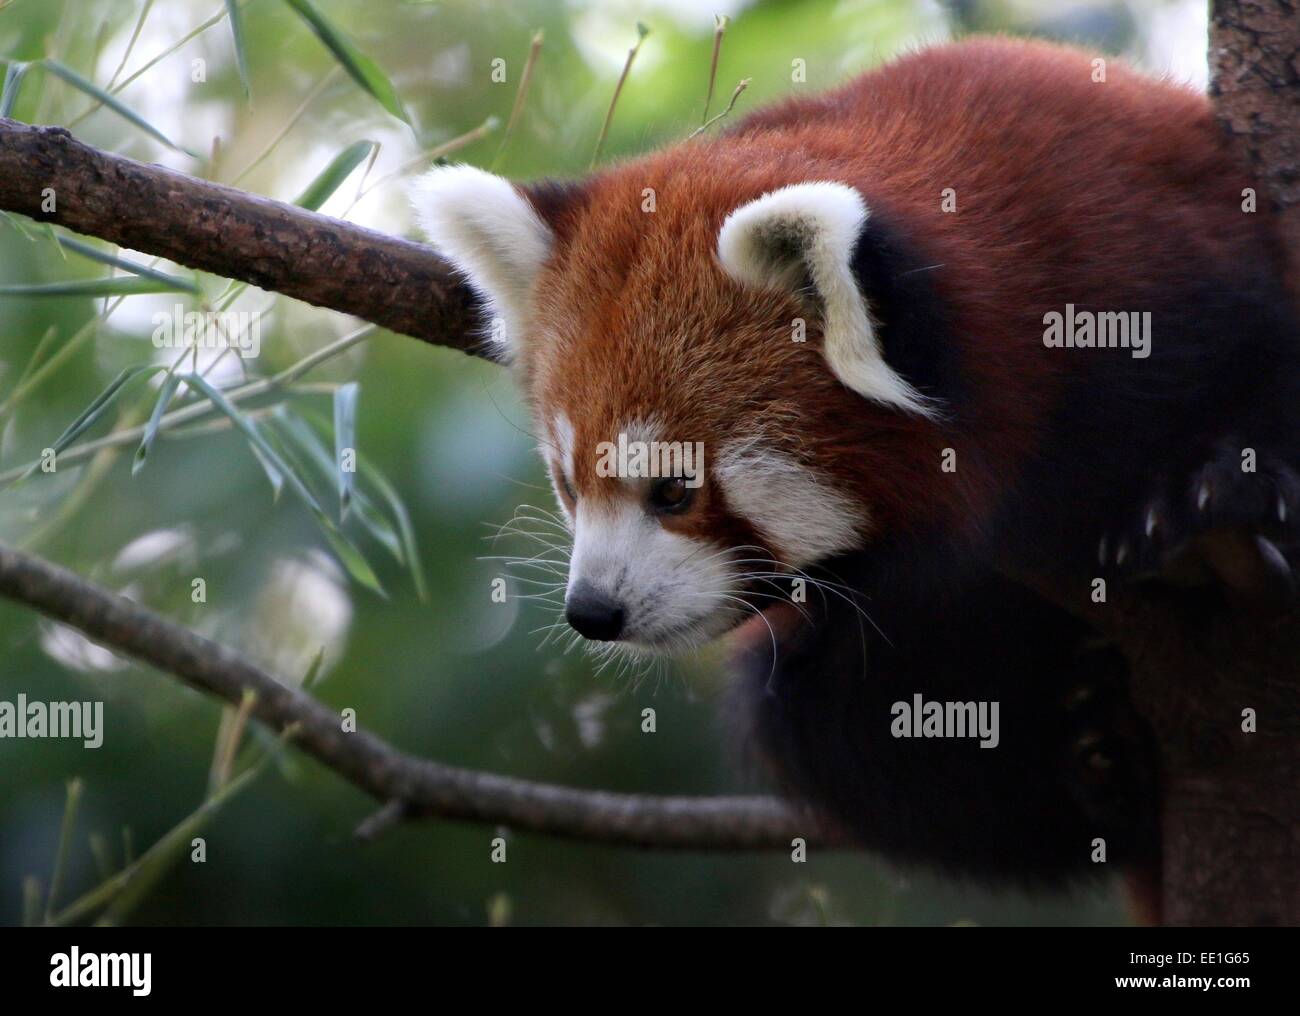 Close-up of an Asian Red or Lesser Panda (Ailurus fulgens) in a tree, seen in profile Stock Photo